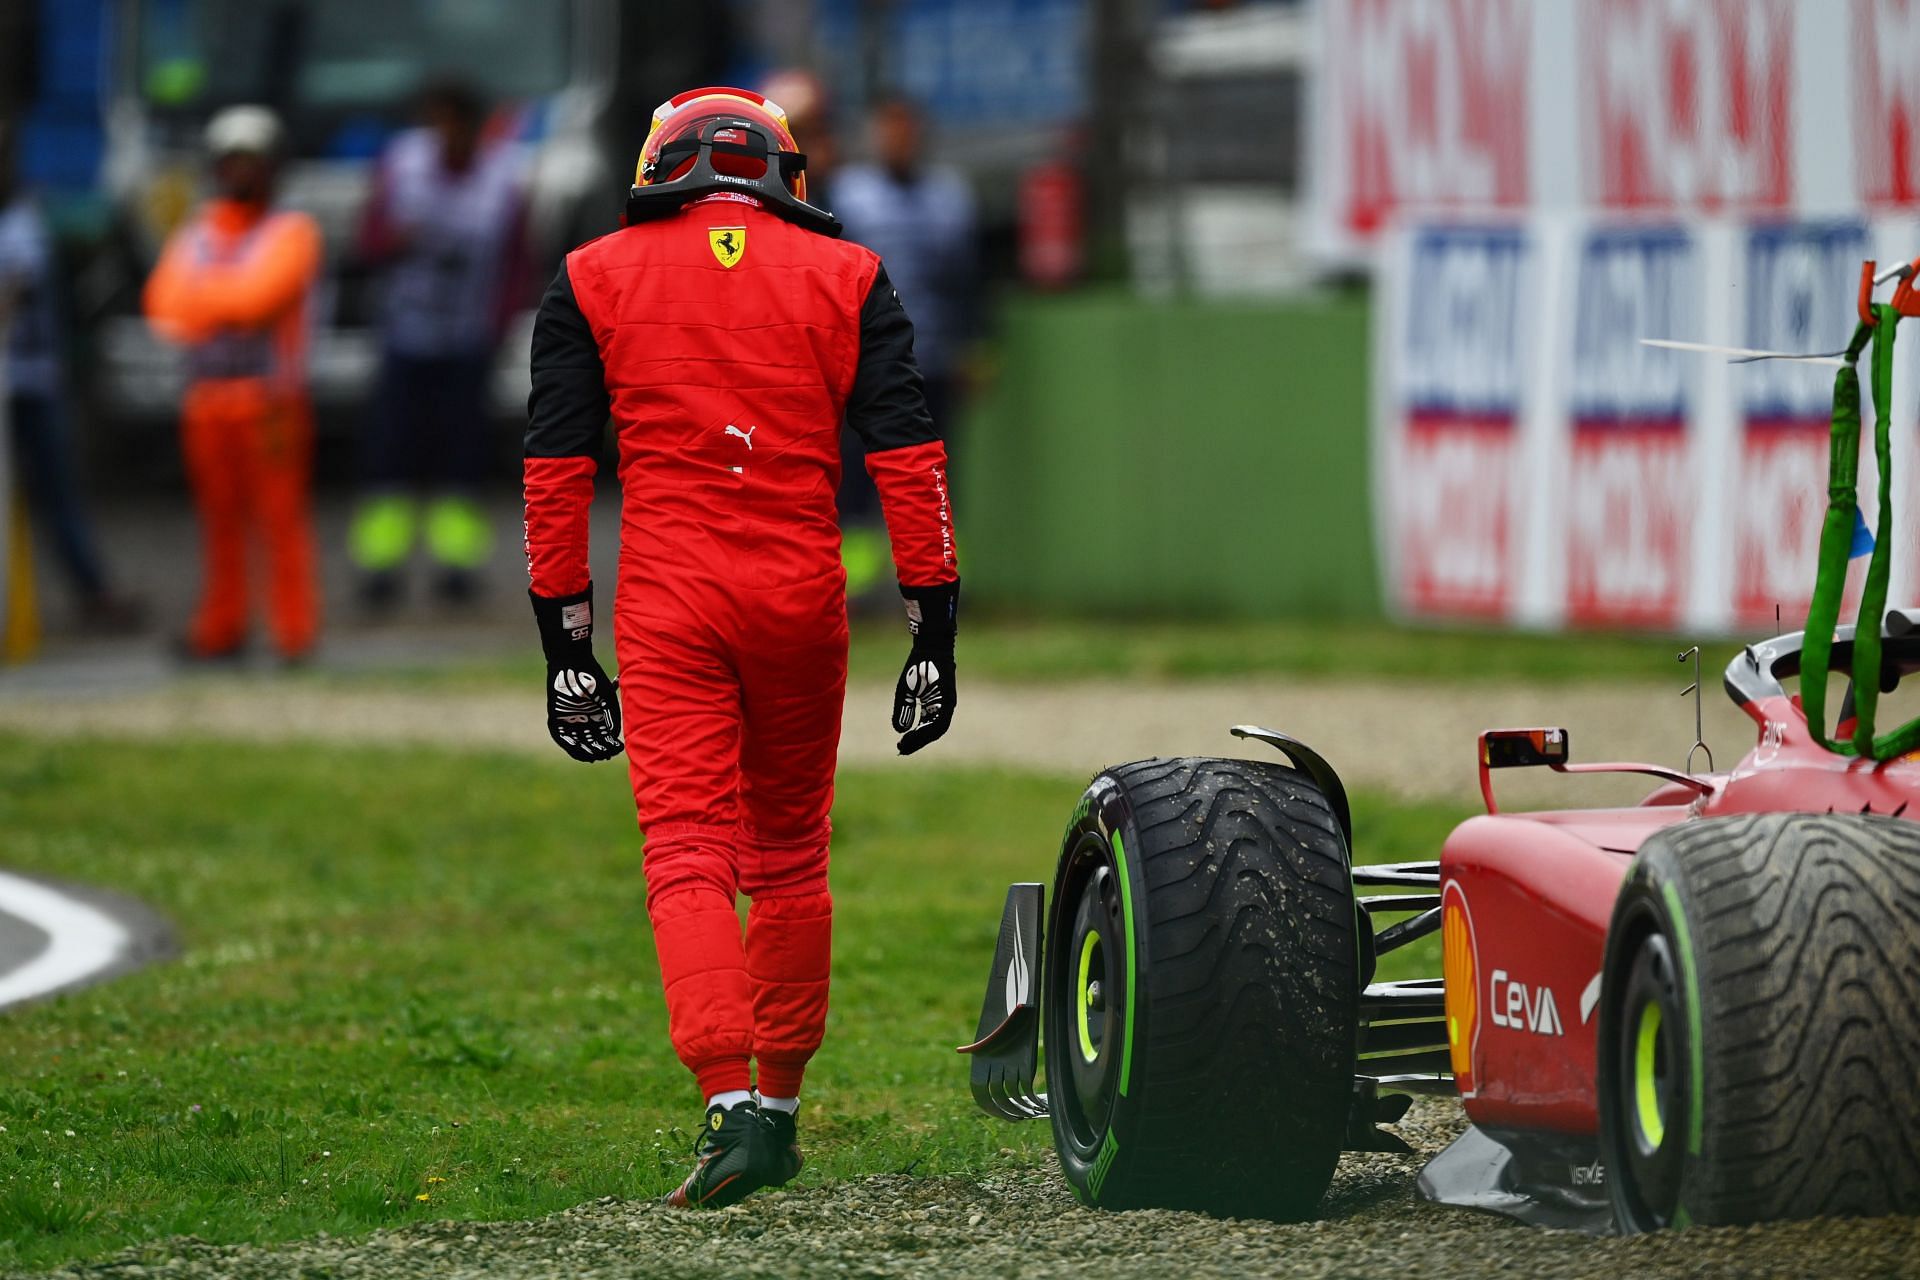 A dejected Carlos Sainz walks away from his Ferrari F1-75 after crashing out of the 2022 F1 Imola GP (Photo by Dan Mullan/Getty Images)